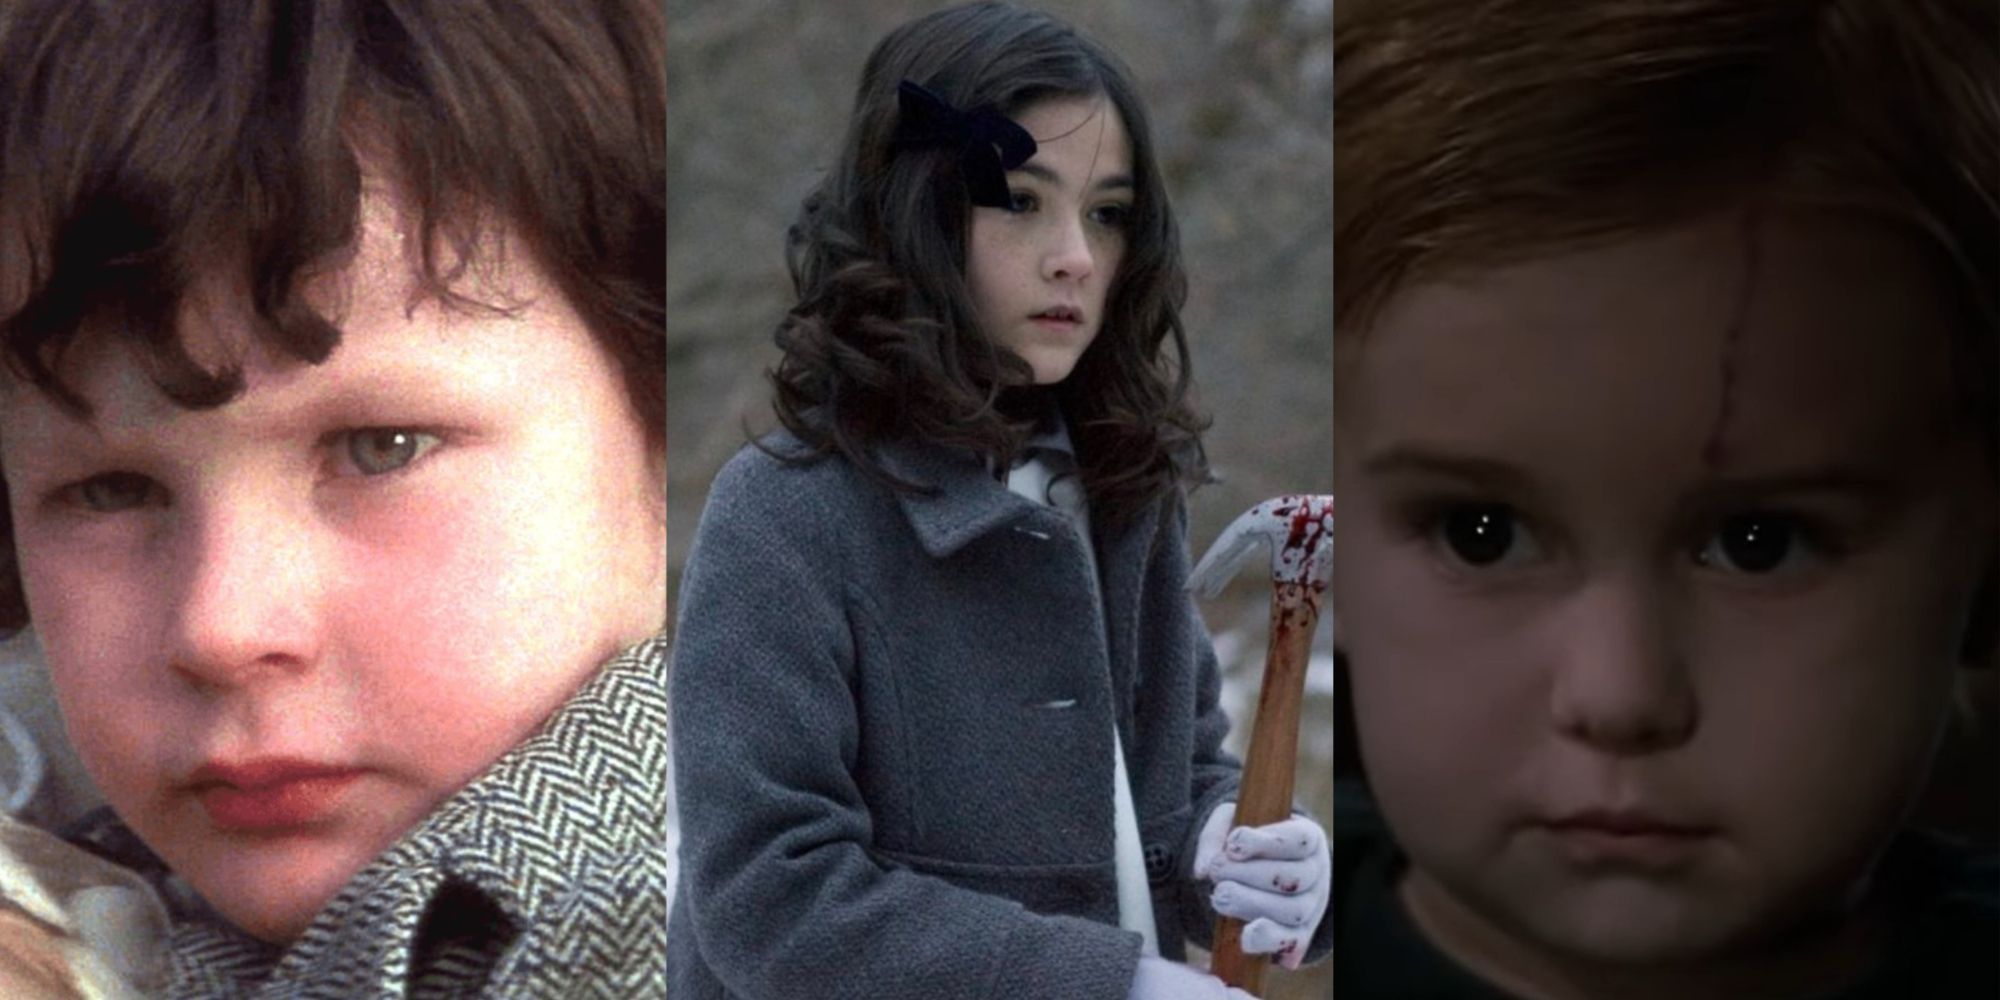 Split image of Damien from The Omen, Esther from Orphan, and Gage from Pet Sematary